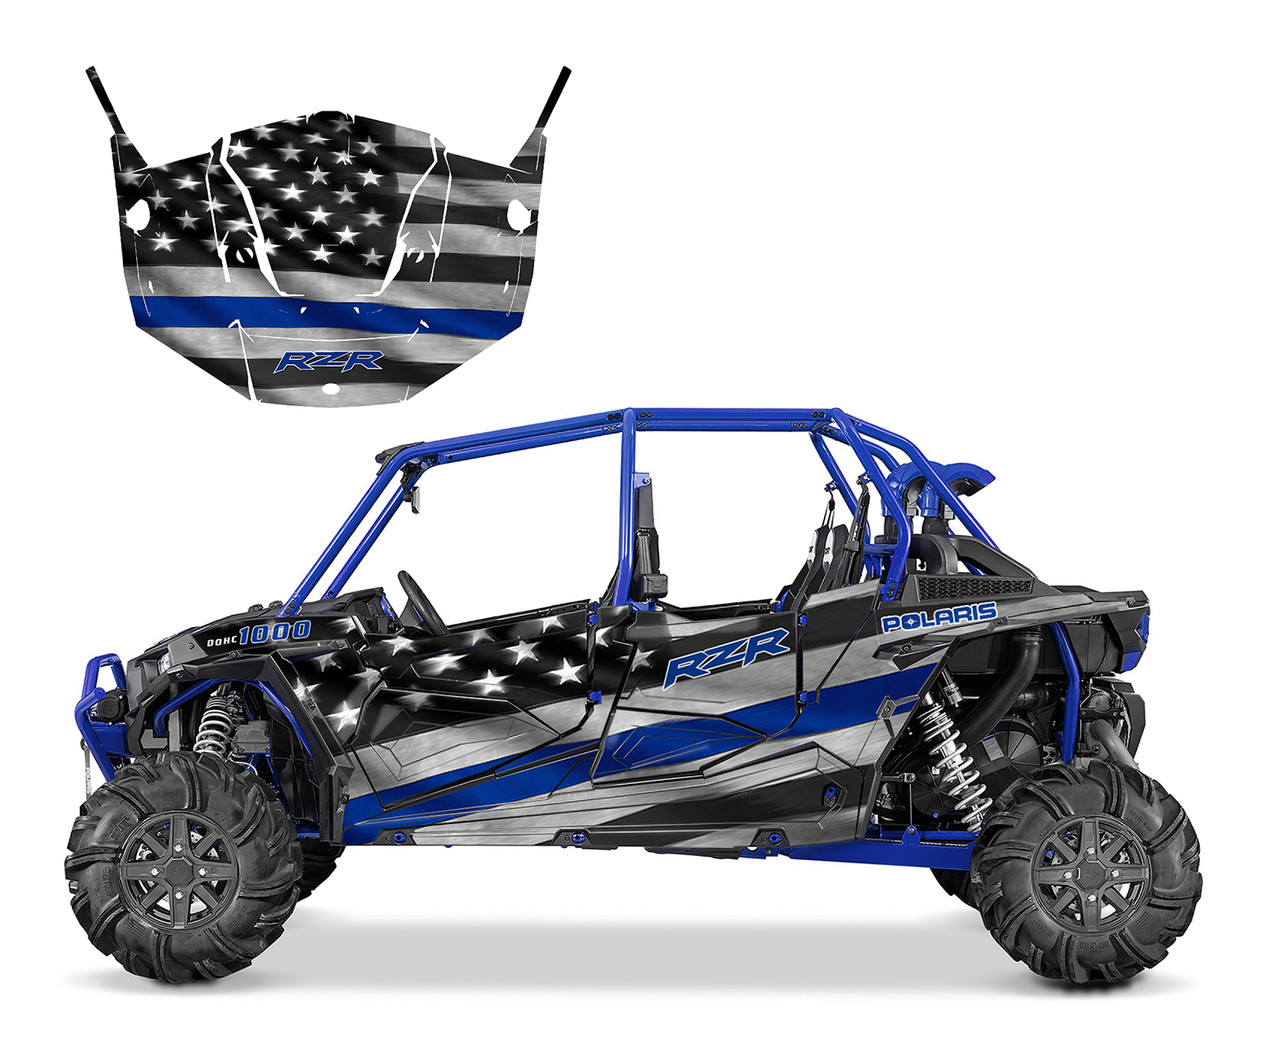 RZR4 1000 graphics with Thin Blue Line design